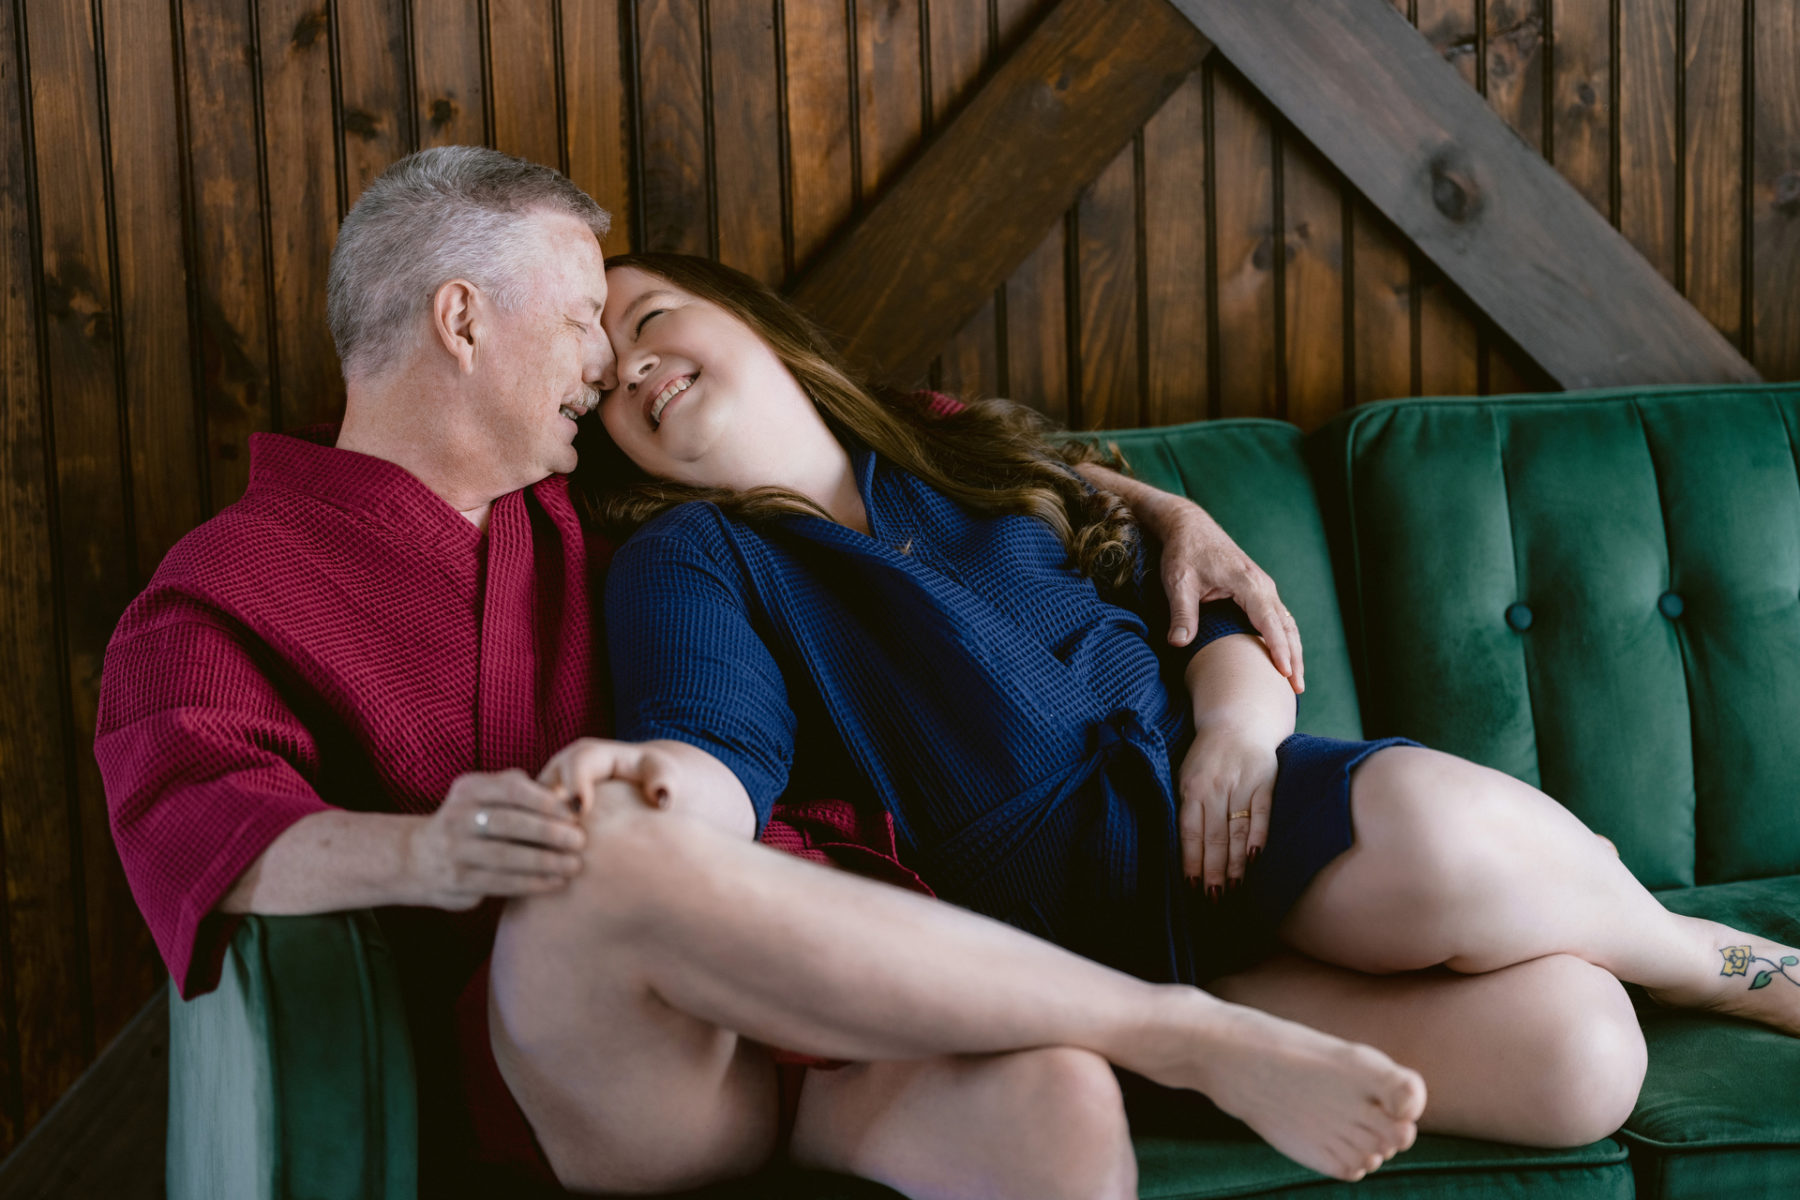 Capturing special moments between couples with boudoir photography